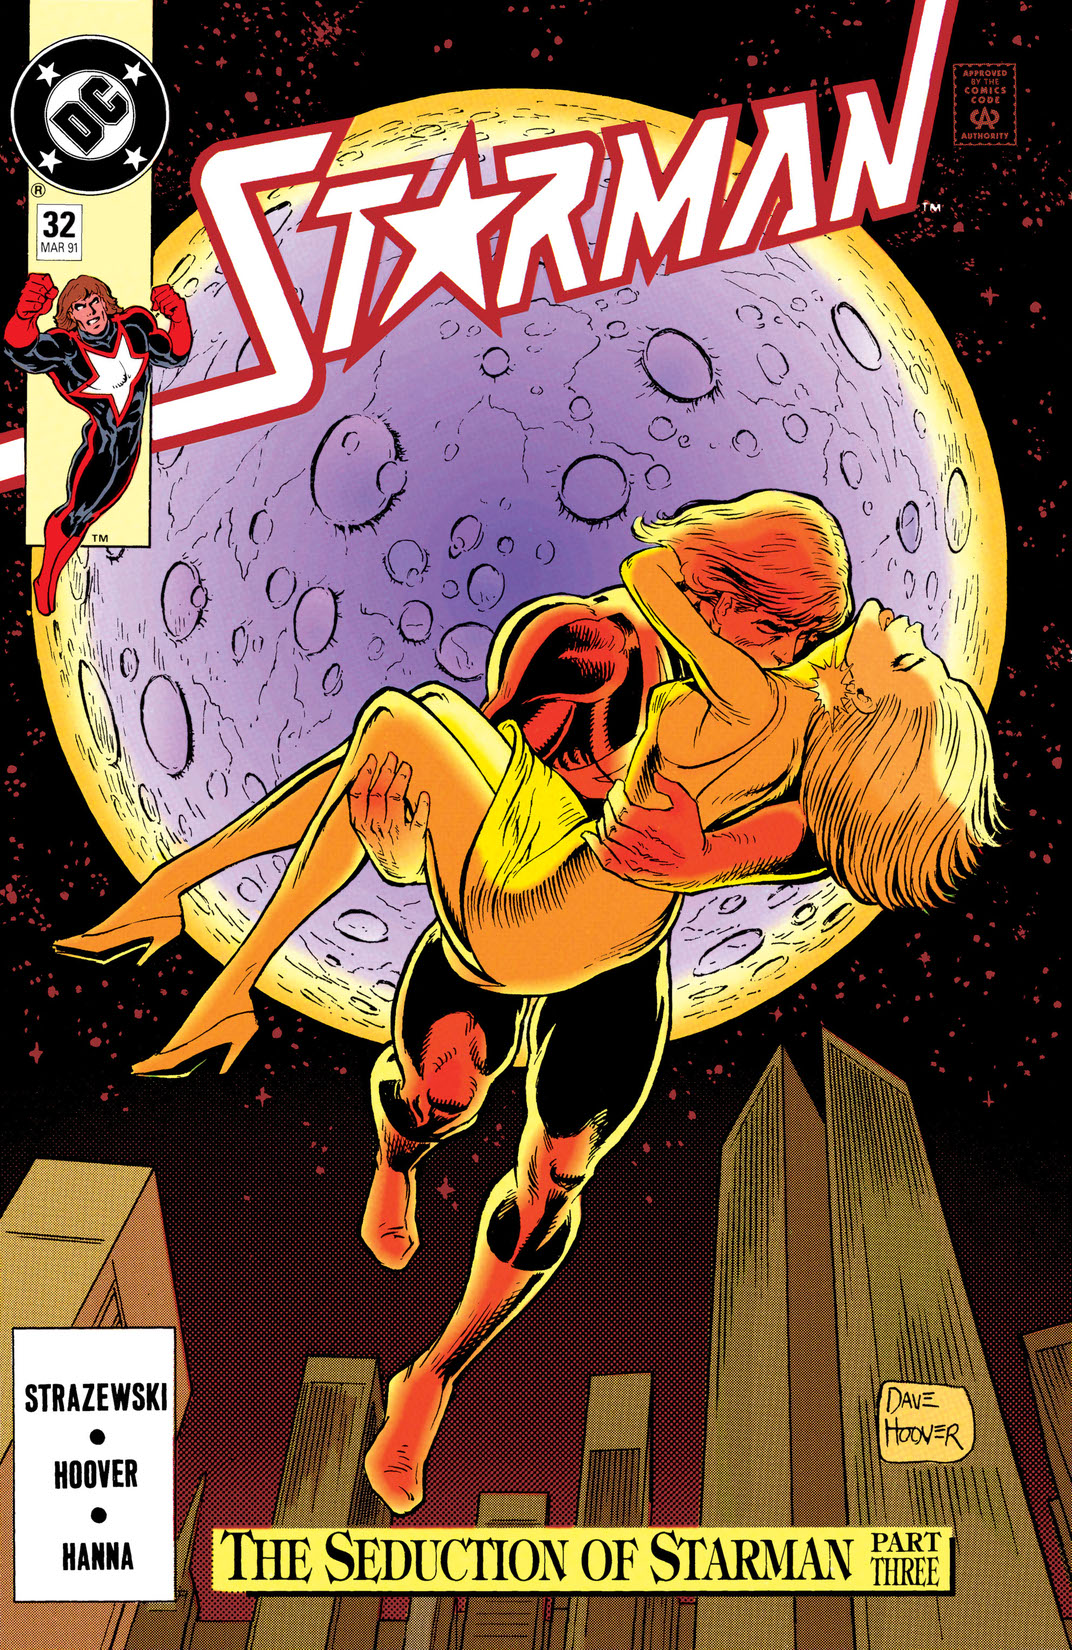 Starman (1988-) #32 preview images